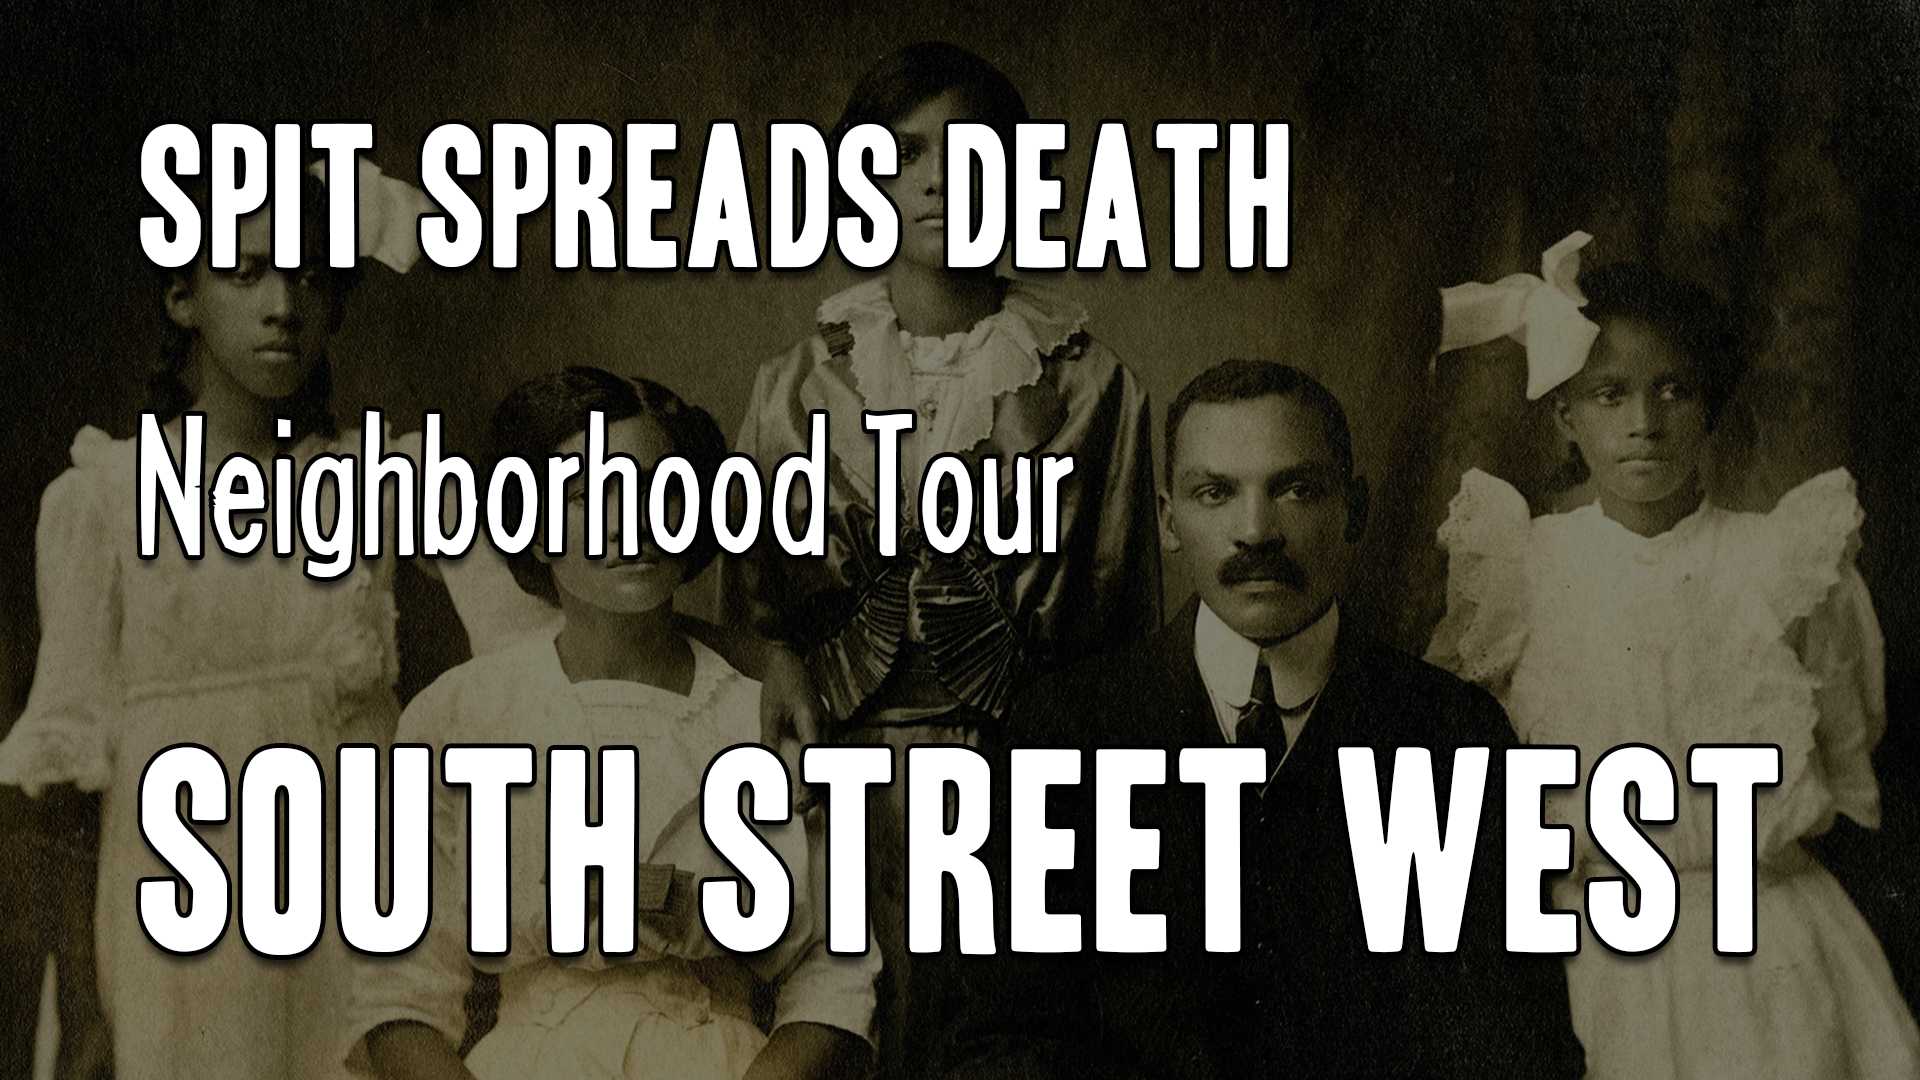 Old photography of an African American family with text overlaid reading "Spit Spreads Death Neighborhood Tour: South Street West"